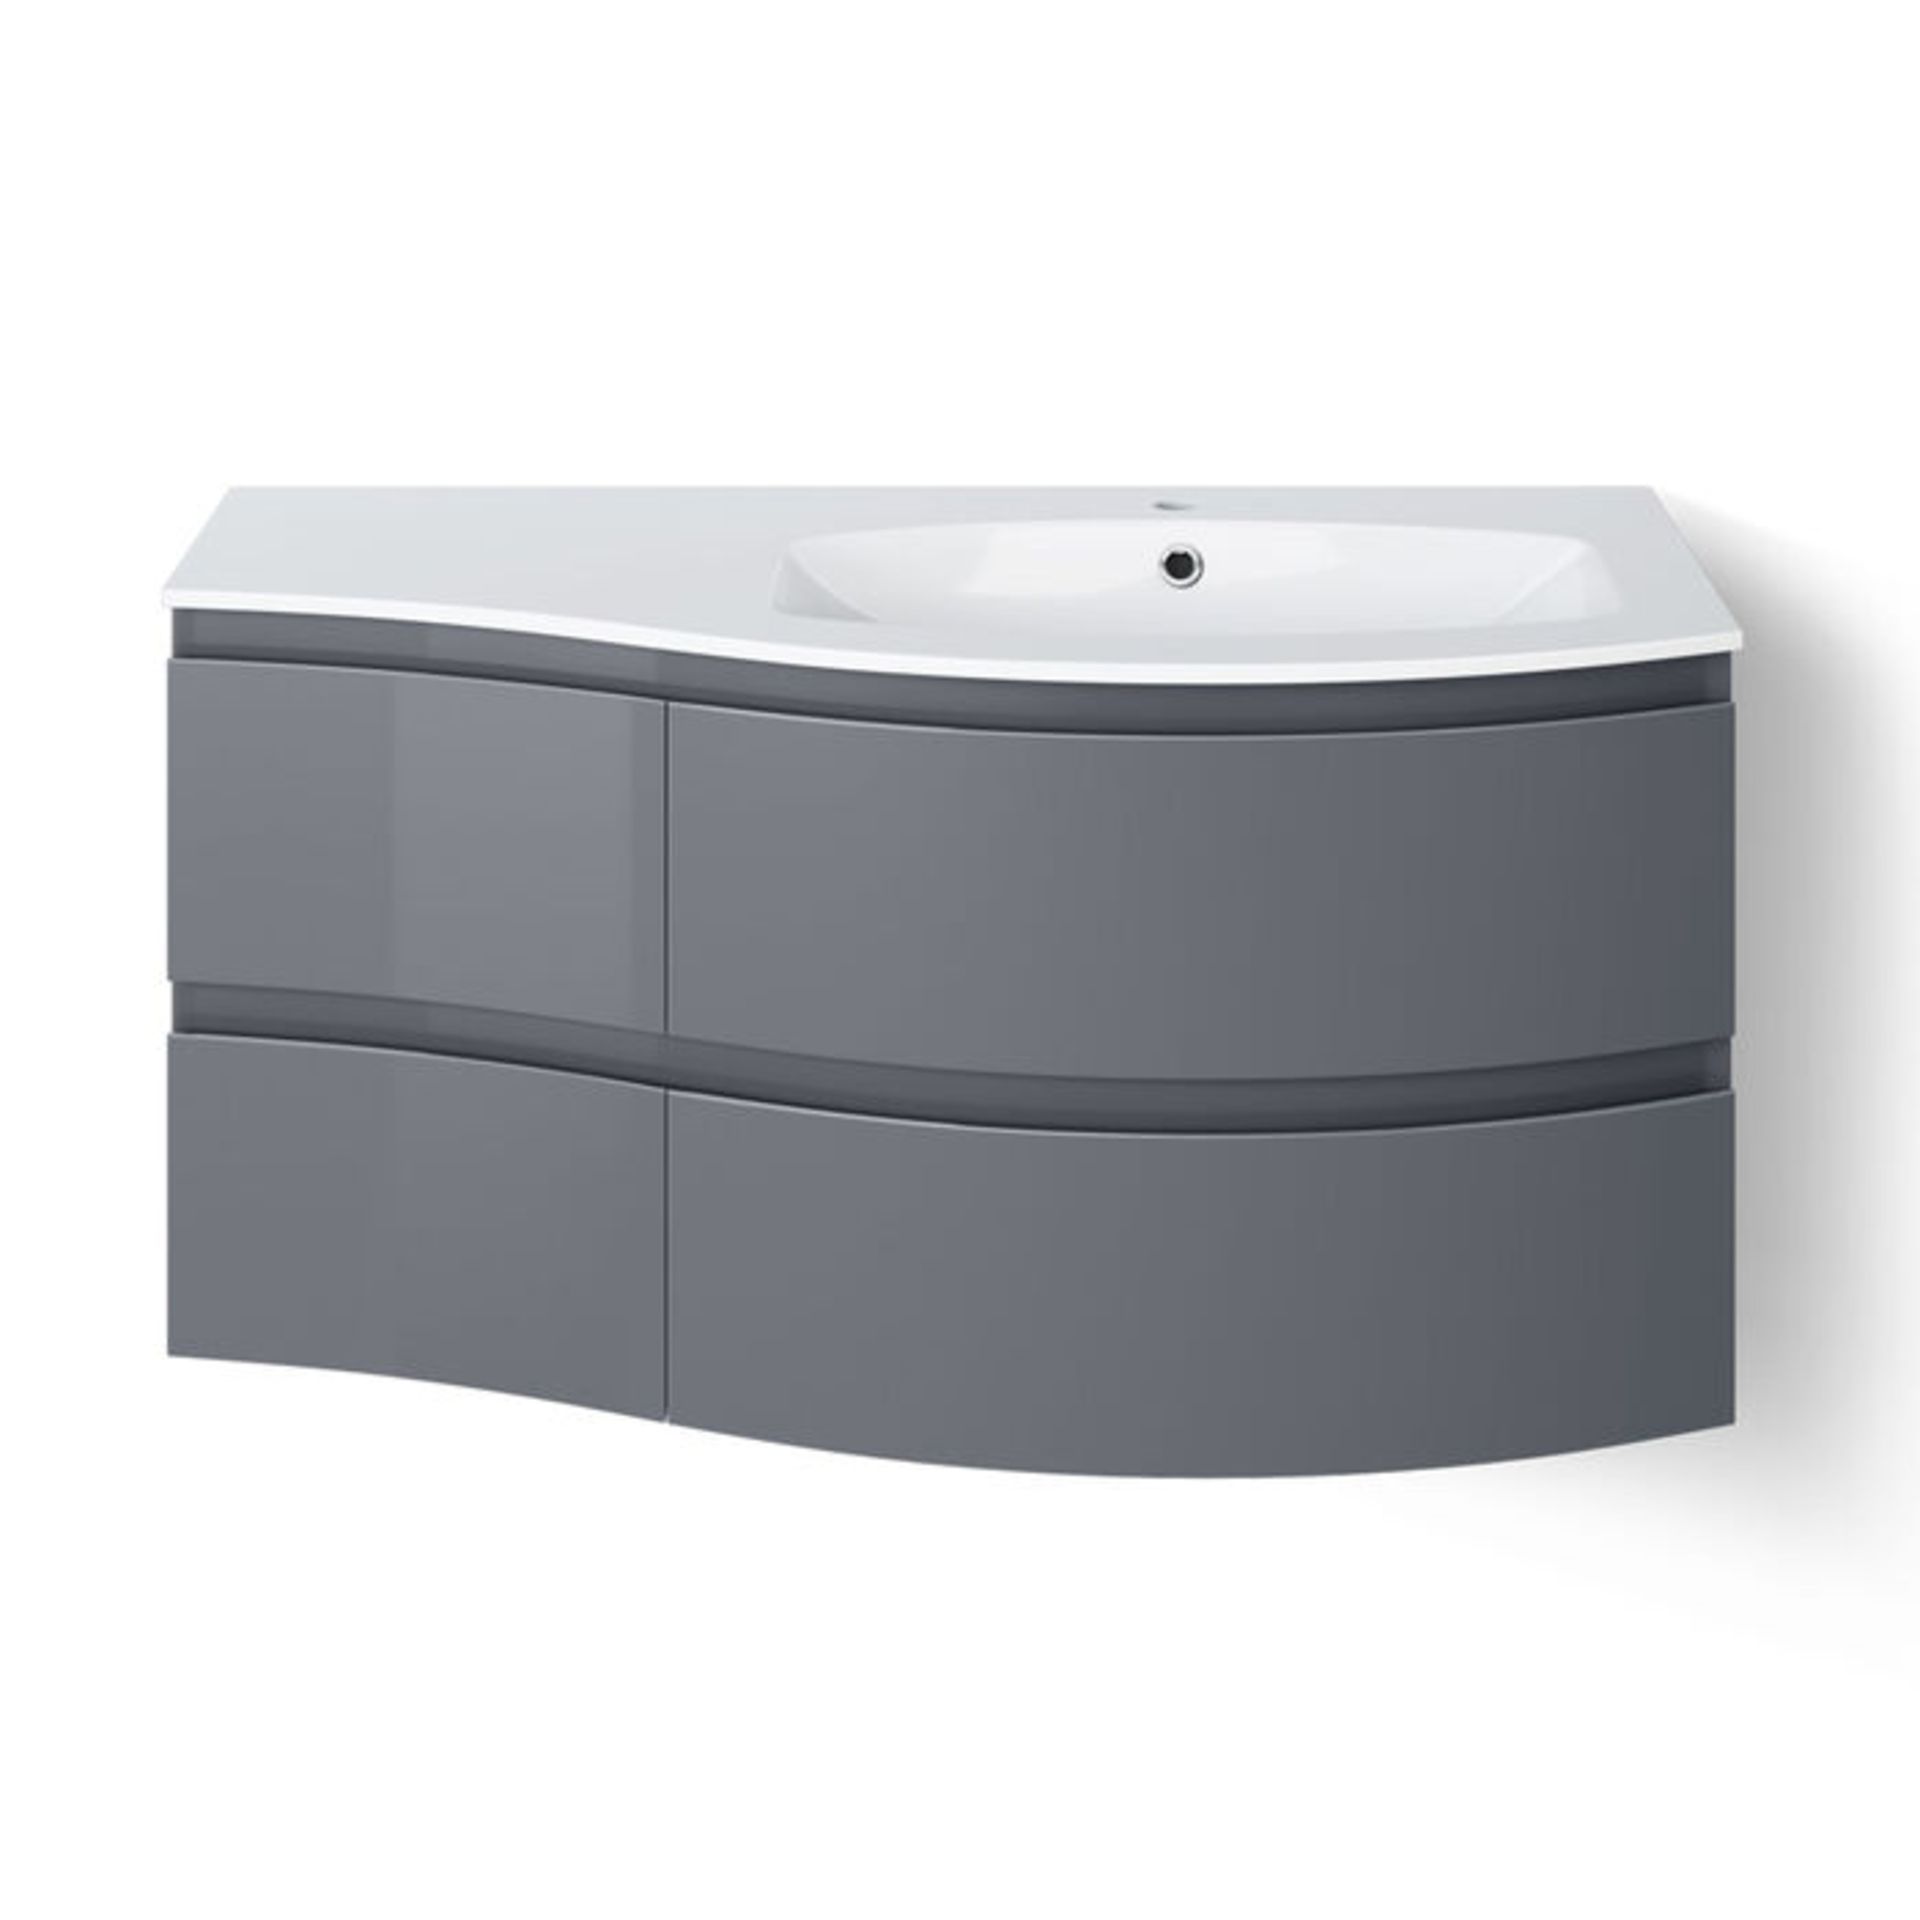 (G5) 1040mm Amelie Gloss Grey Curved Vanity Unit - Right Hand - Wall Hung. Comes complete with ... - Image 4 of 5